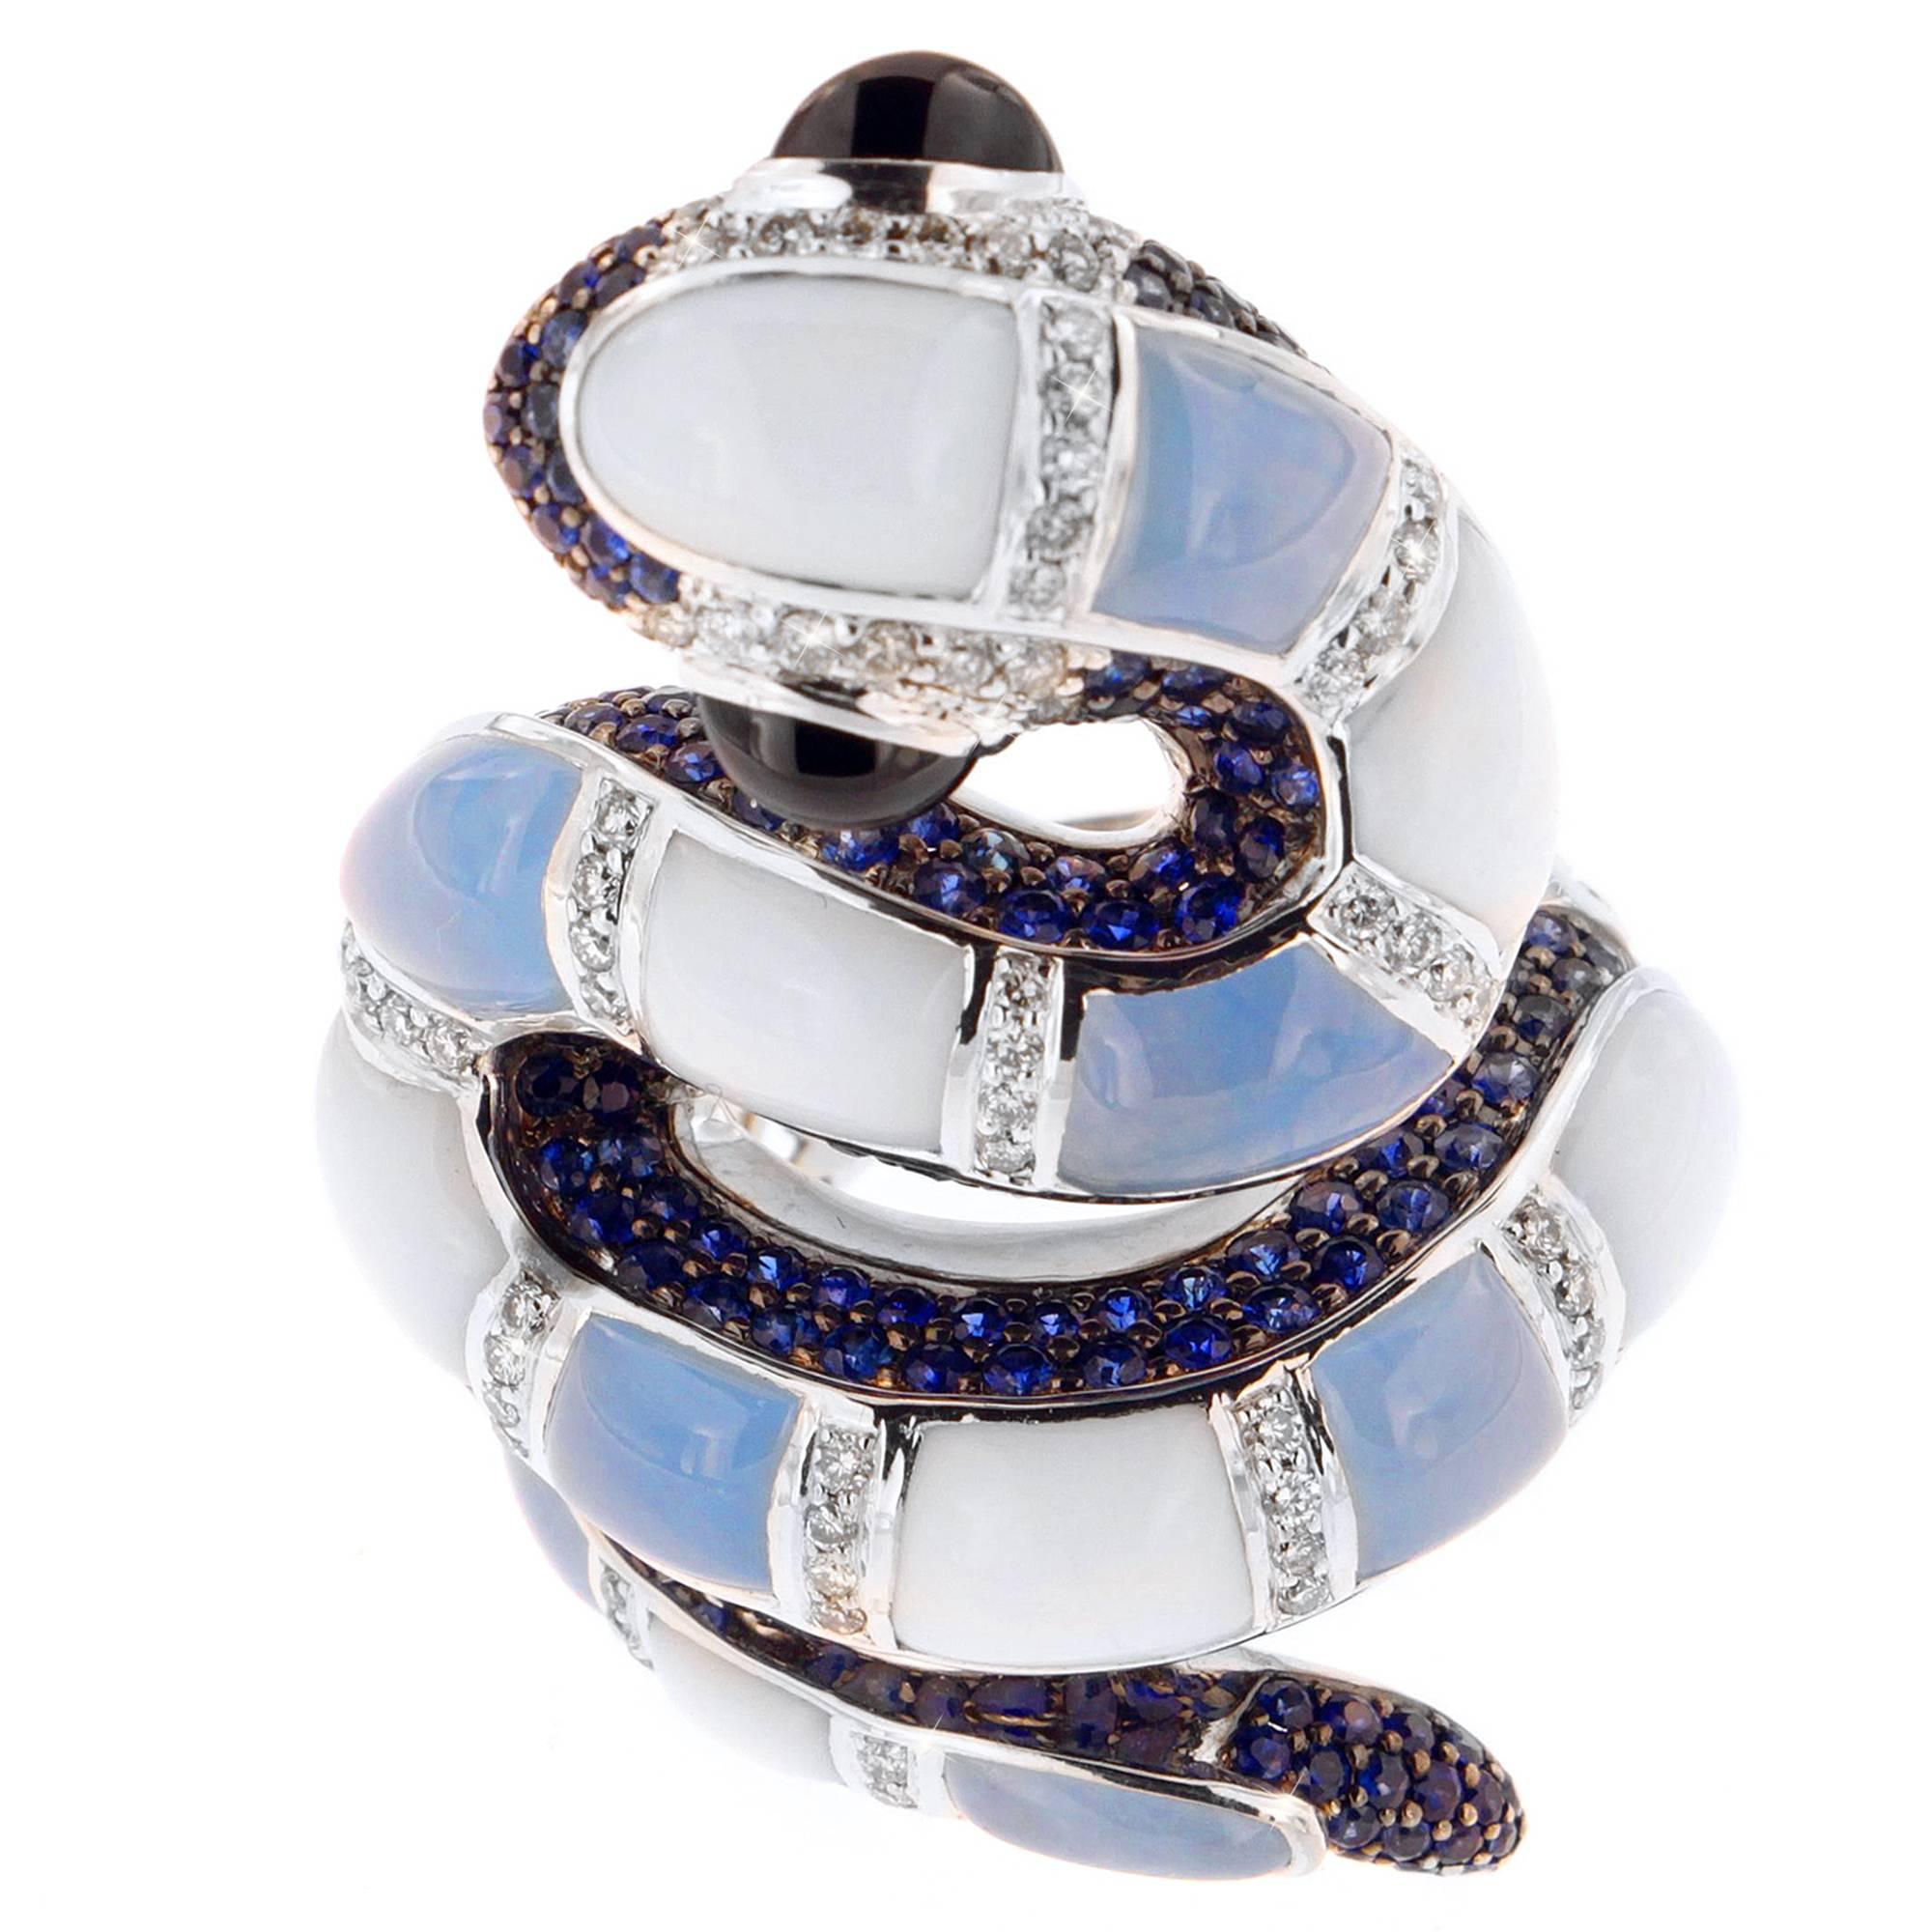 Ready to strike at a moment's notice is the stunningly detailed Pastel Python ring, a Zorab Creation.

Wrapping its way around your finger, marblelized sections of German-treated blue jade 7.24 carats and white chalcedony 7.24 carats intersect with